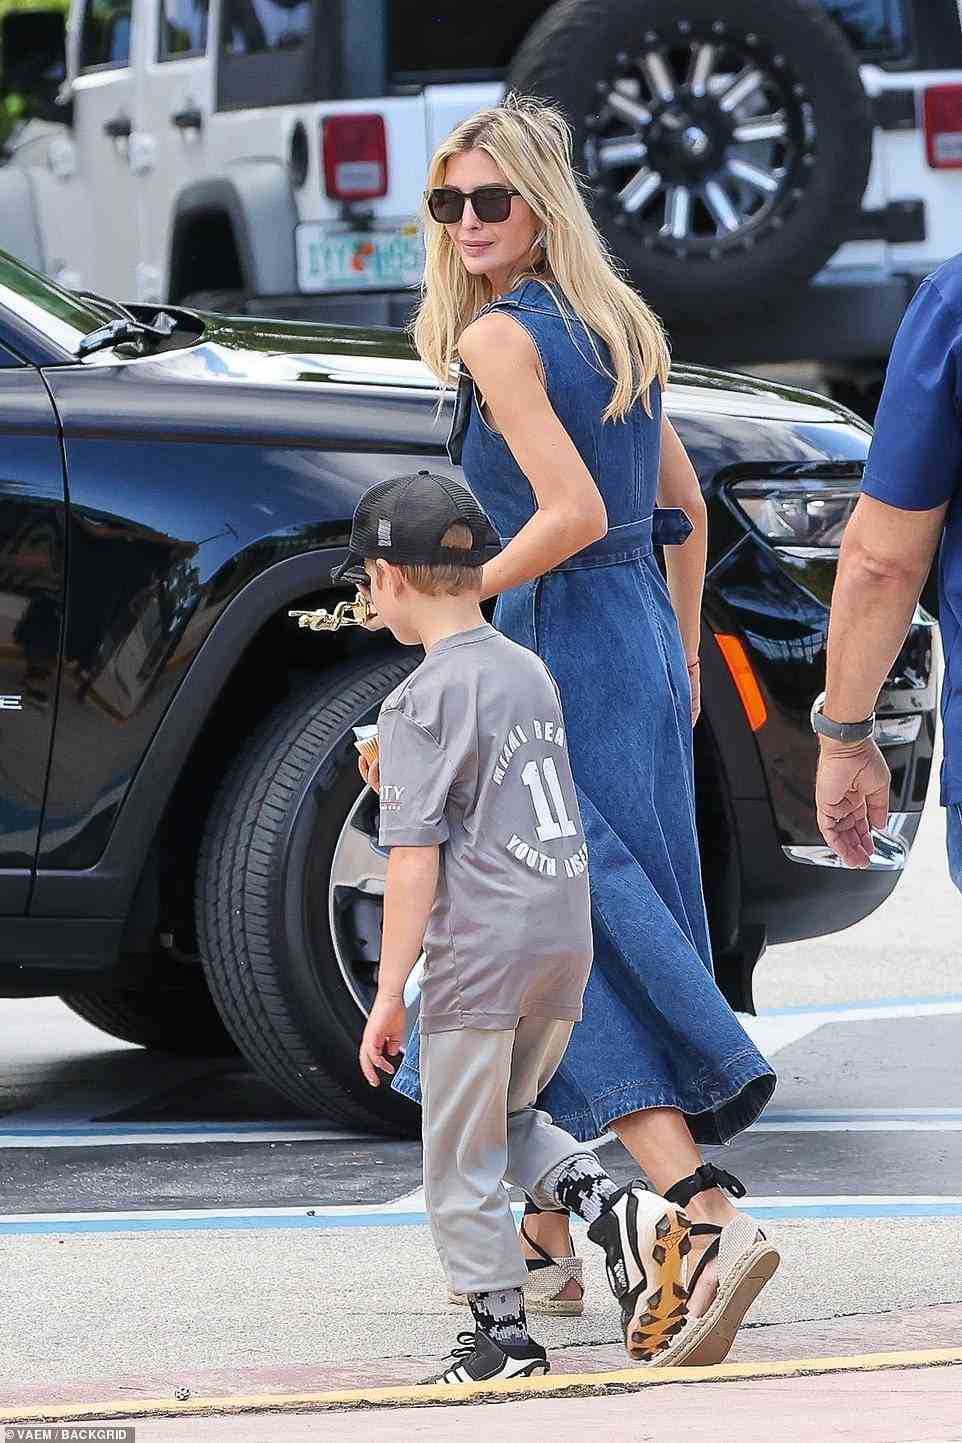 Ivanka wore her long blonde hair loose around her shoulders for the family outing